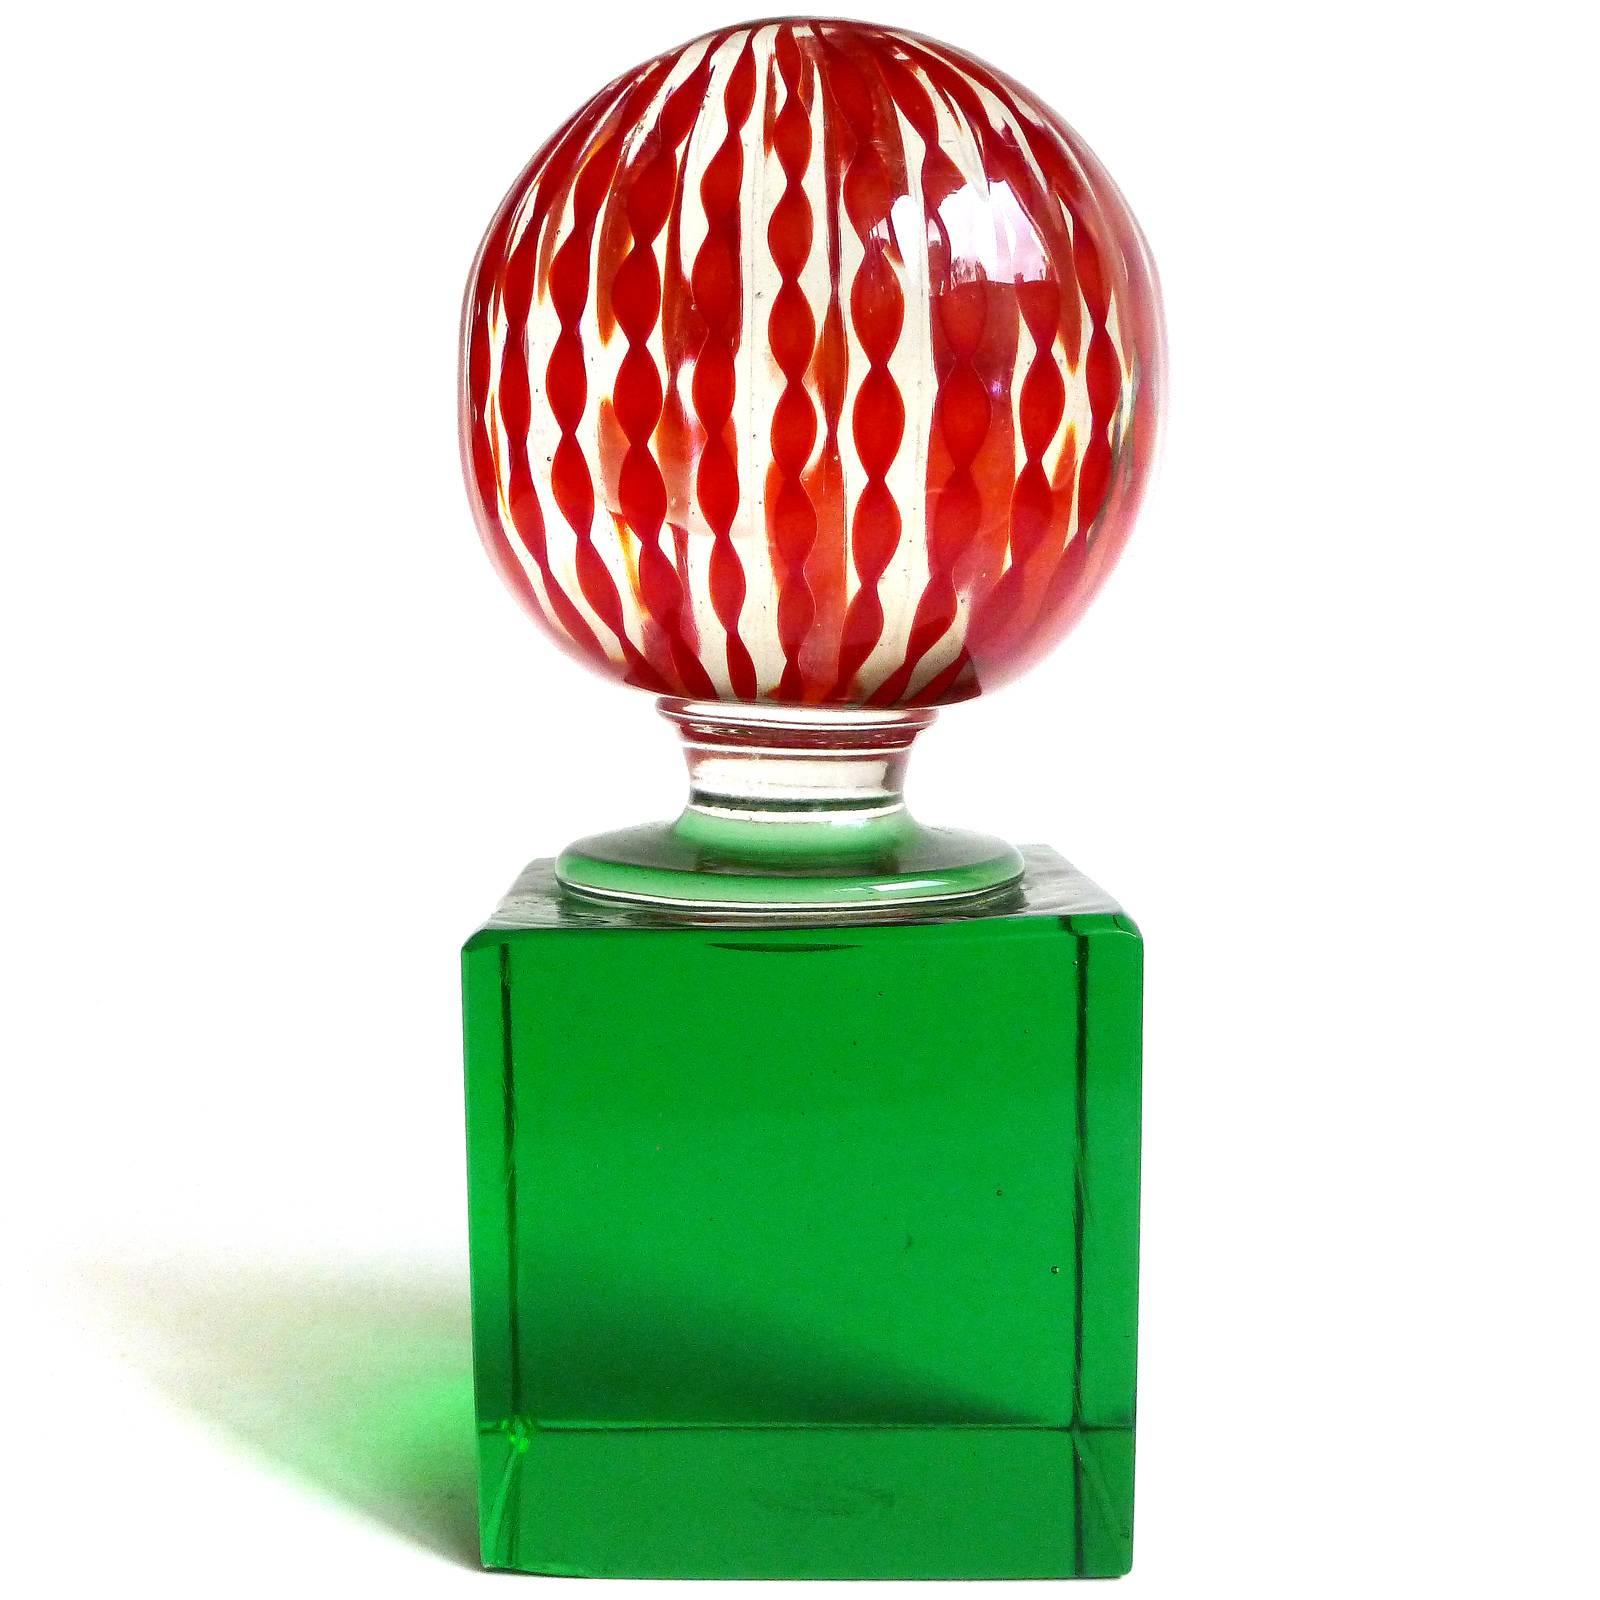 Murano handblown red twisted ribbons on green base Italian art glass paperweight. Documented to Paolo Venini, and signed underneath 